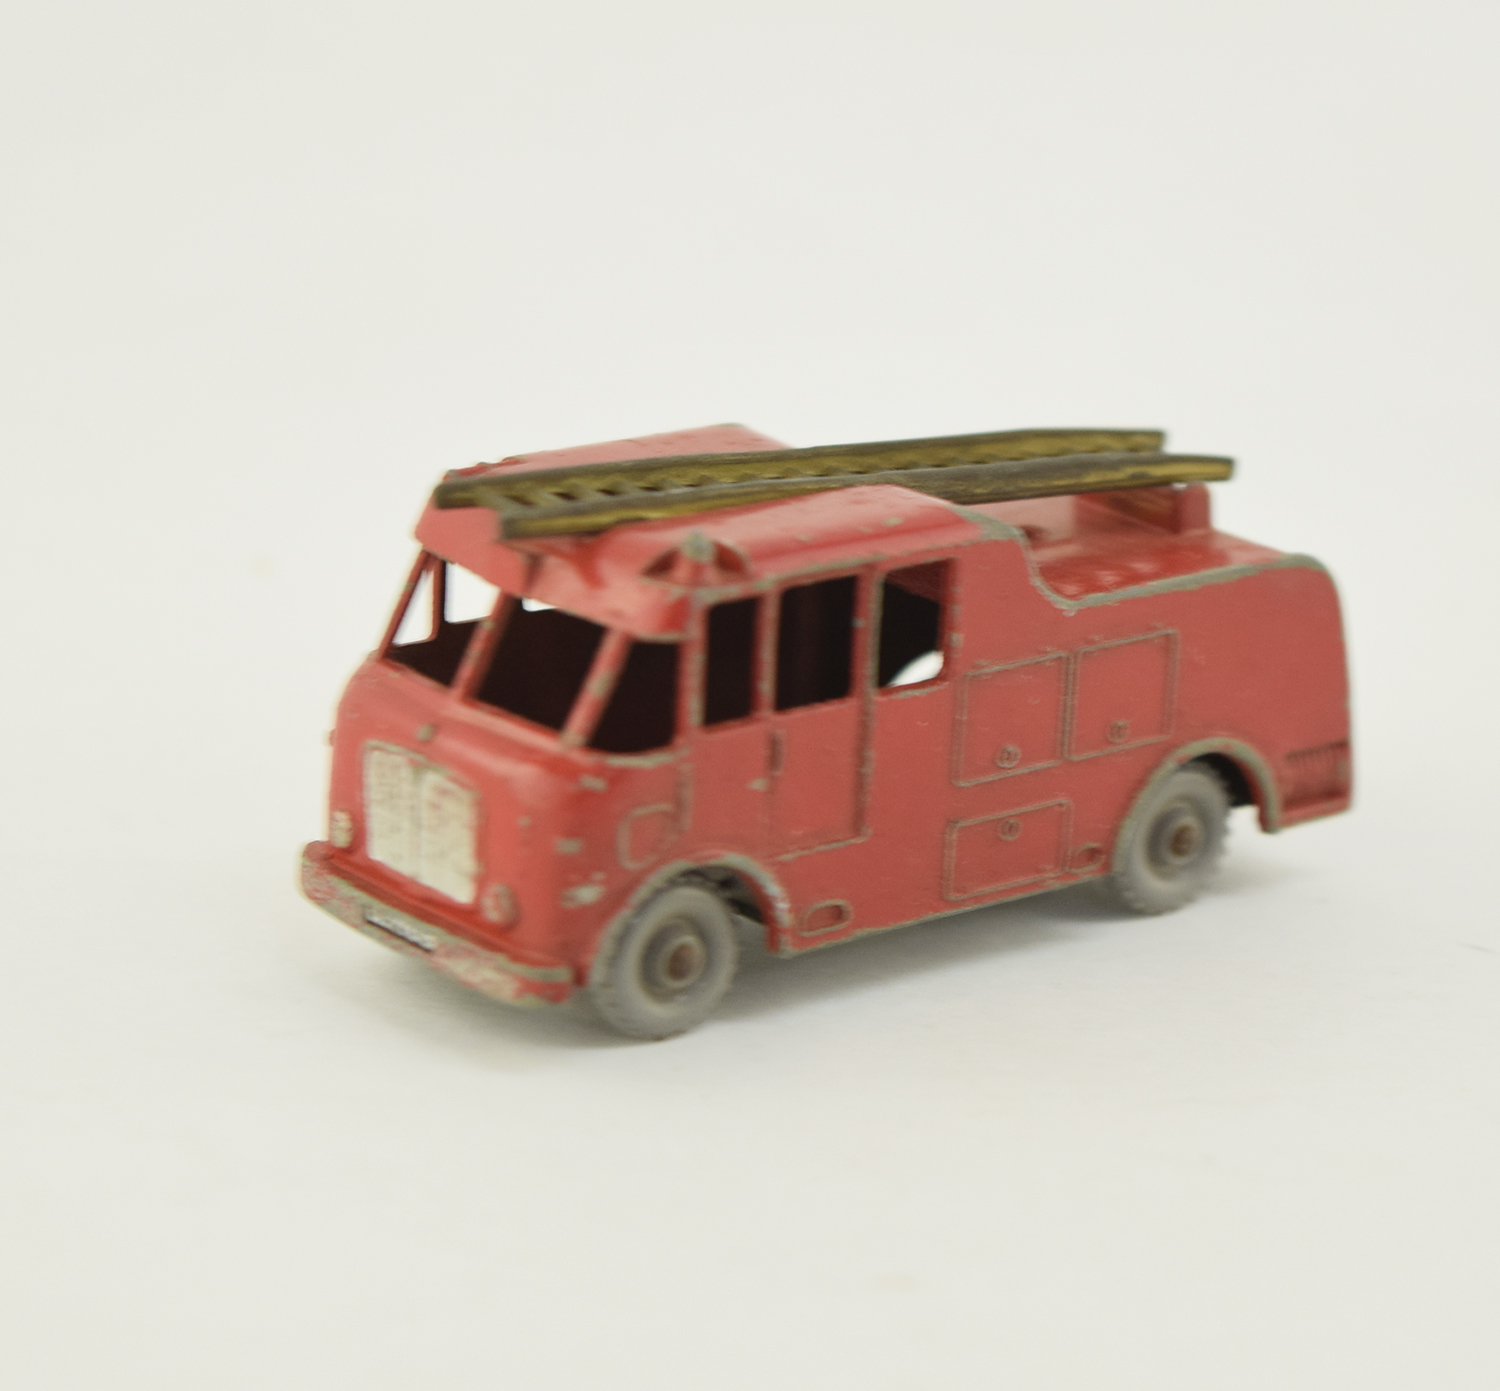 MERRYWEATHER_MARQUIS_SERIESⅢ_No.9_FIRE ENGINE